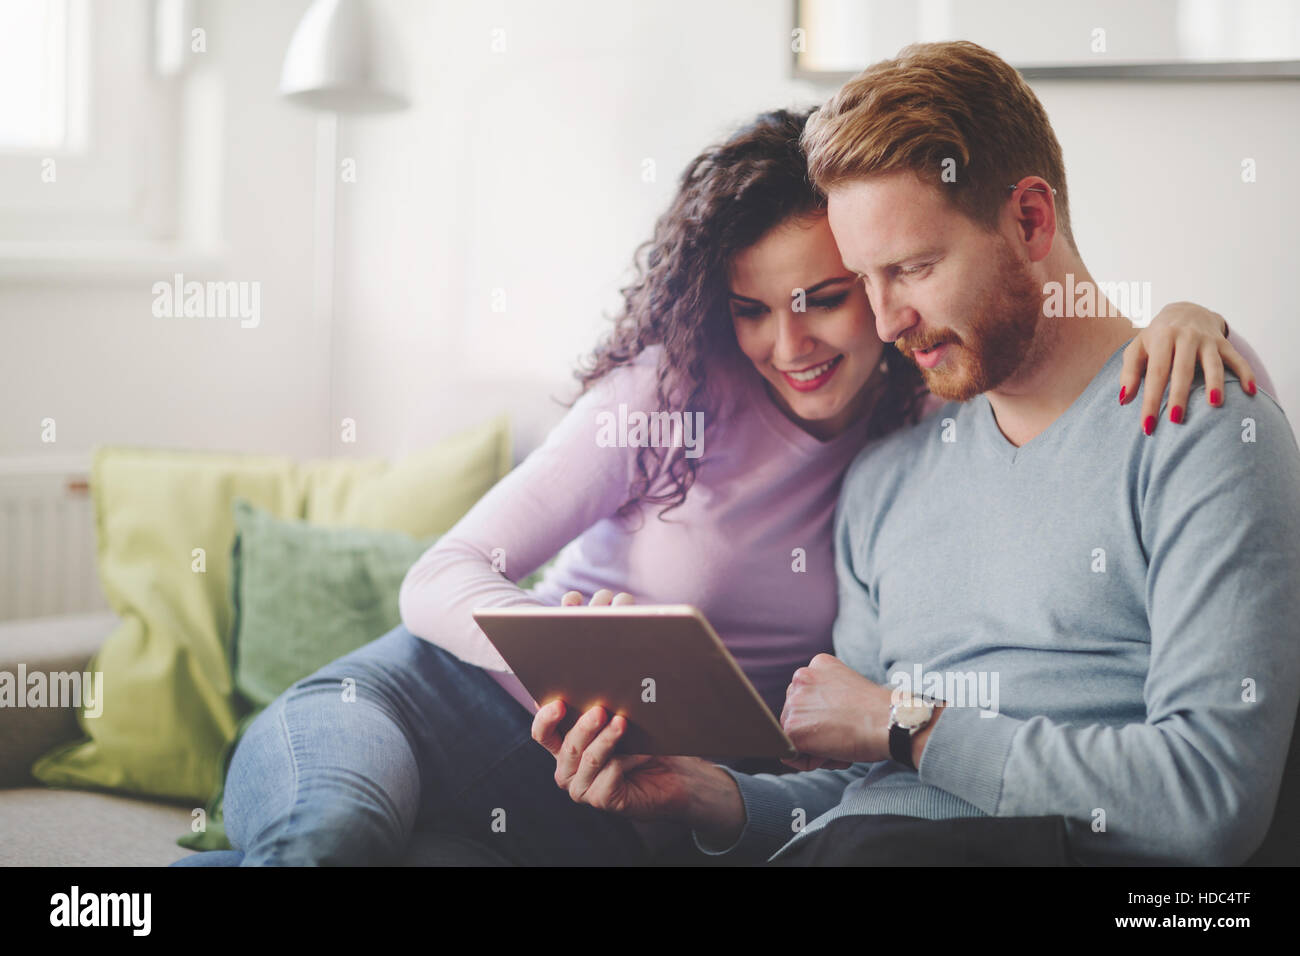 Couple in love hugging and smiling at home Banque D'Images